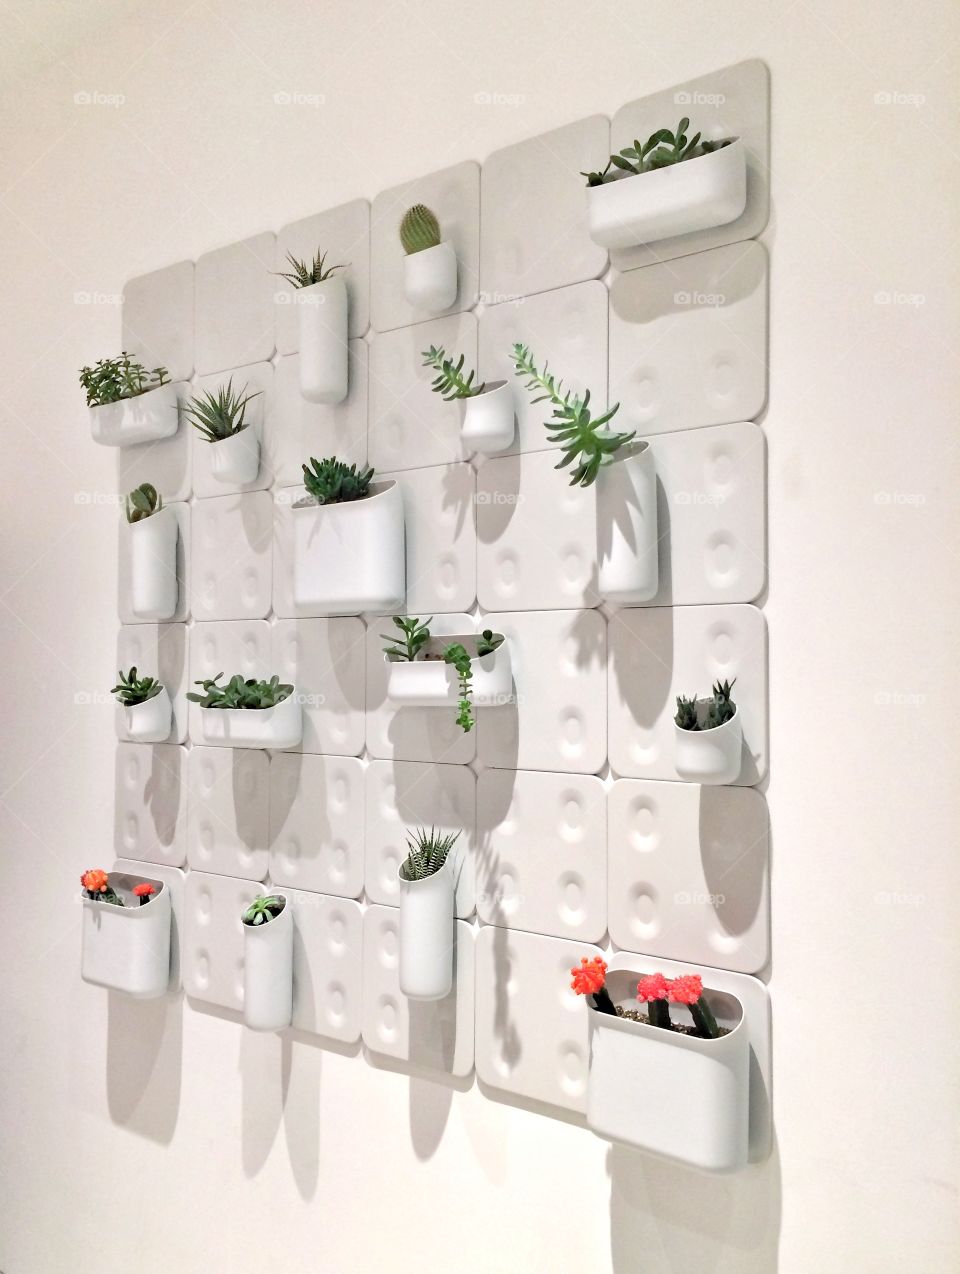 Modular indoor wall planter with succulents